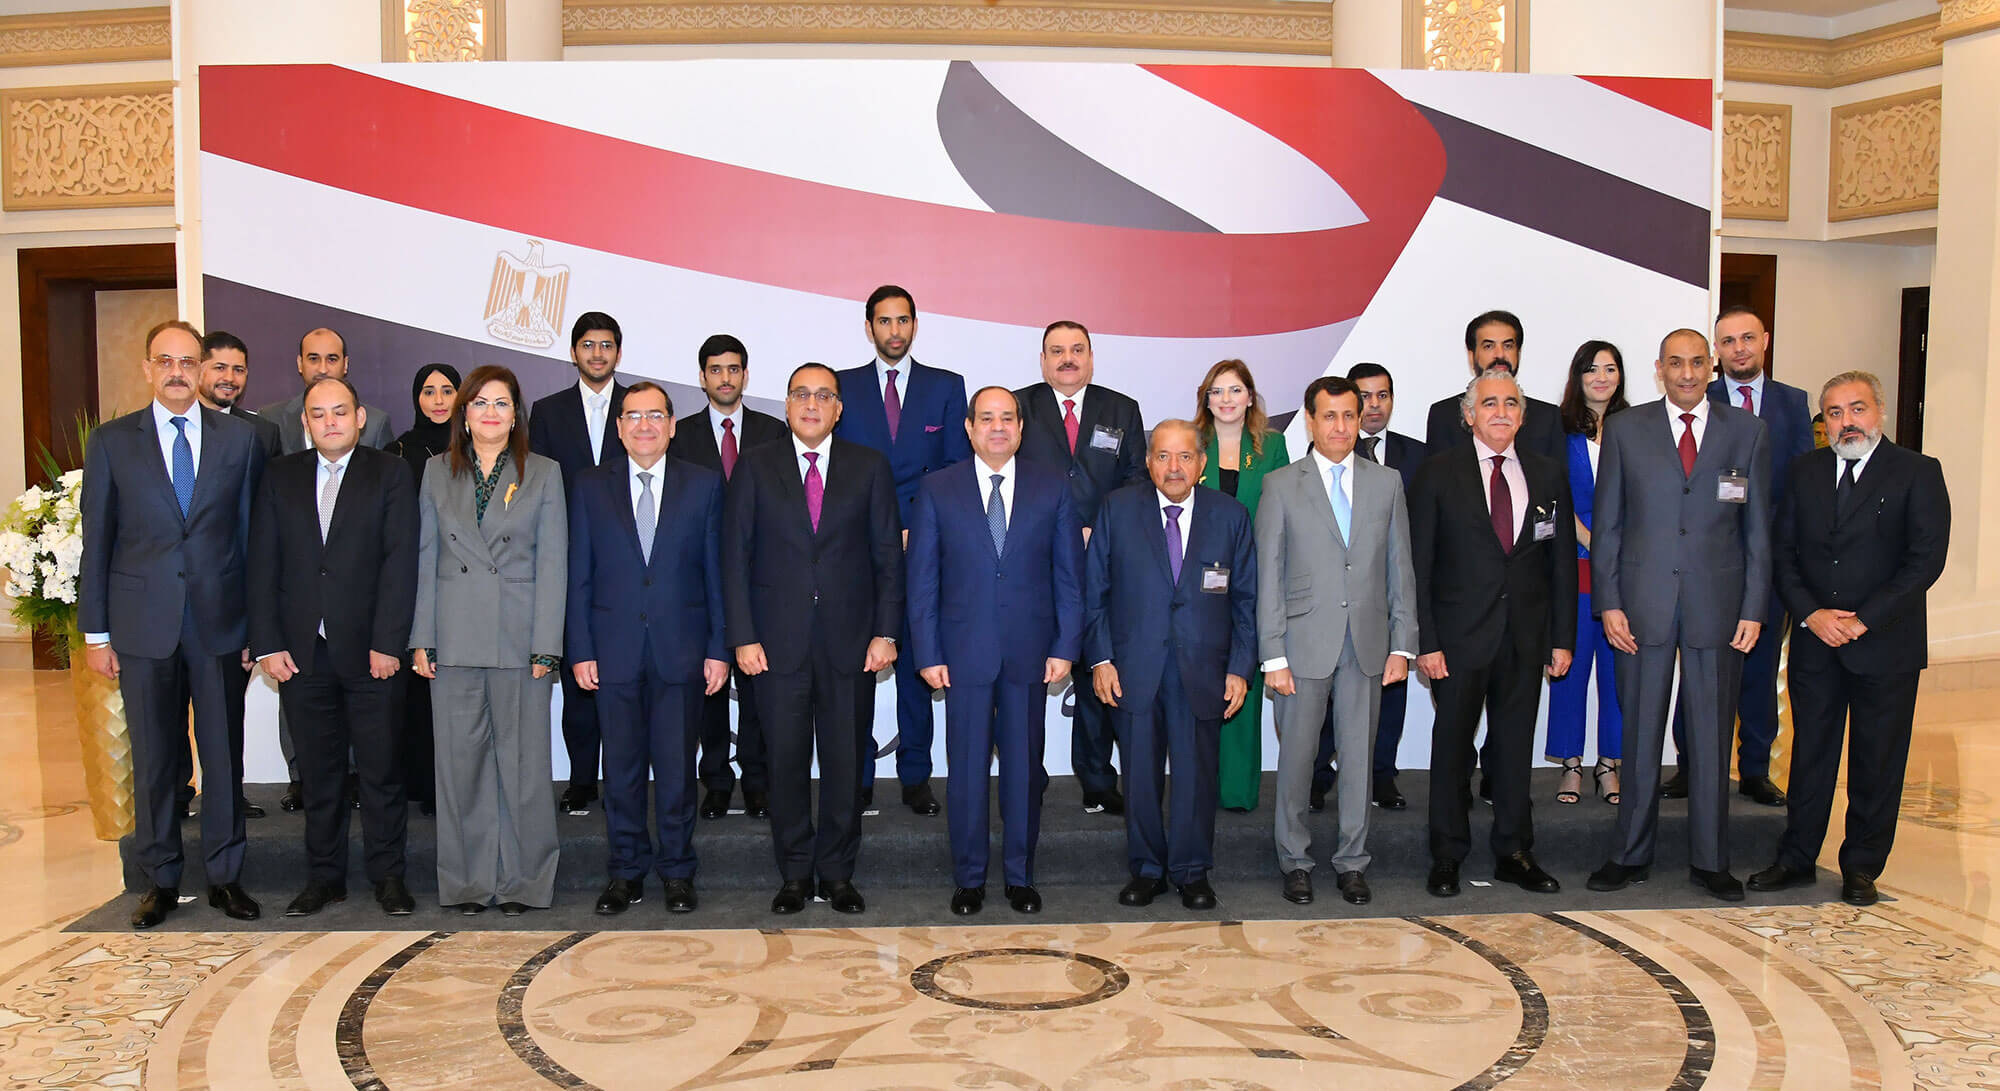 QBA Meeting with H.E President Abdel Fattah Al-Sisi, President of the Arab Republic of Egypt, during the visit to Egypt